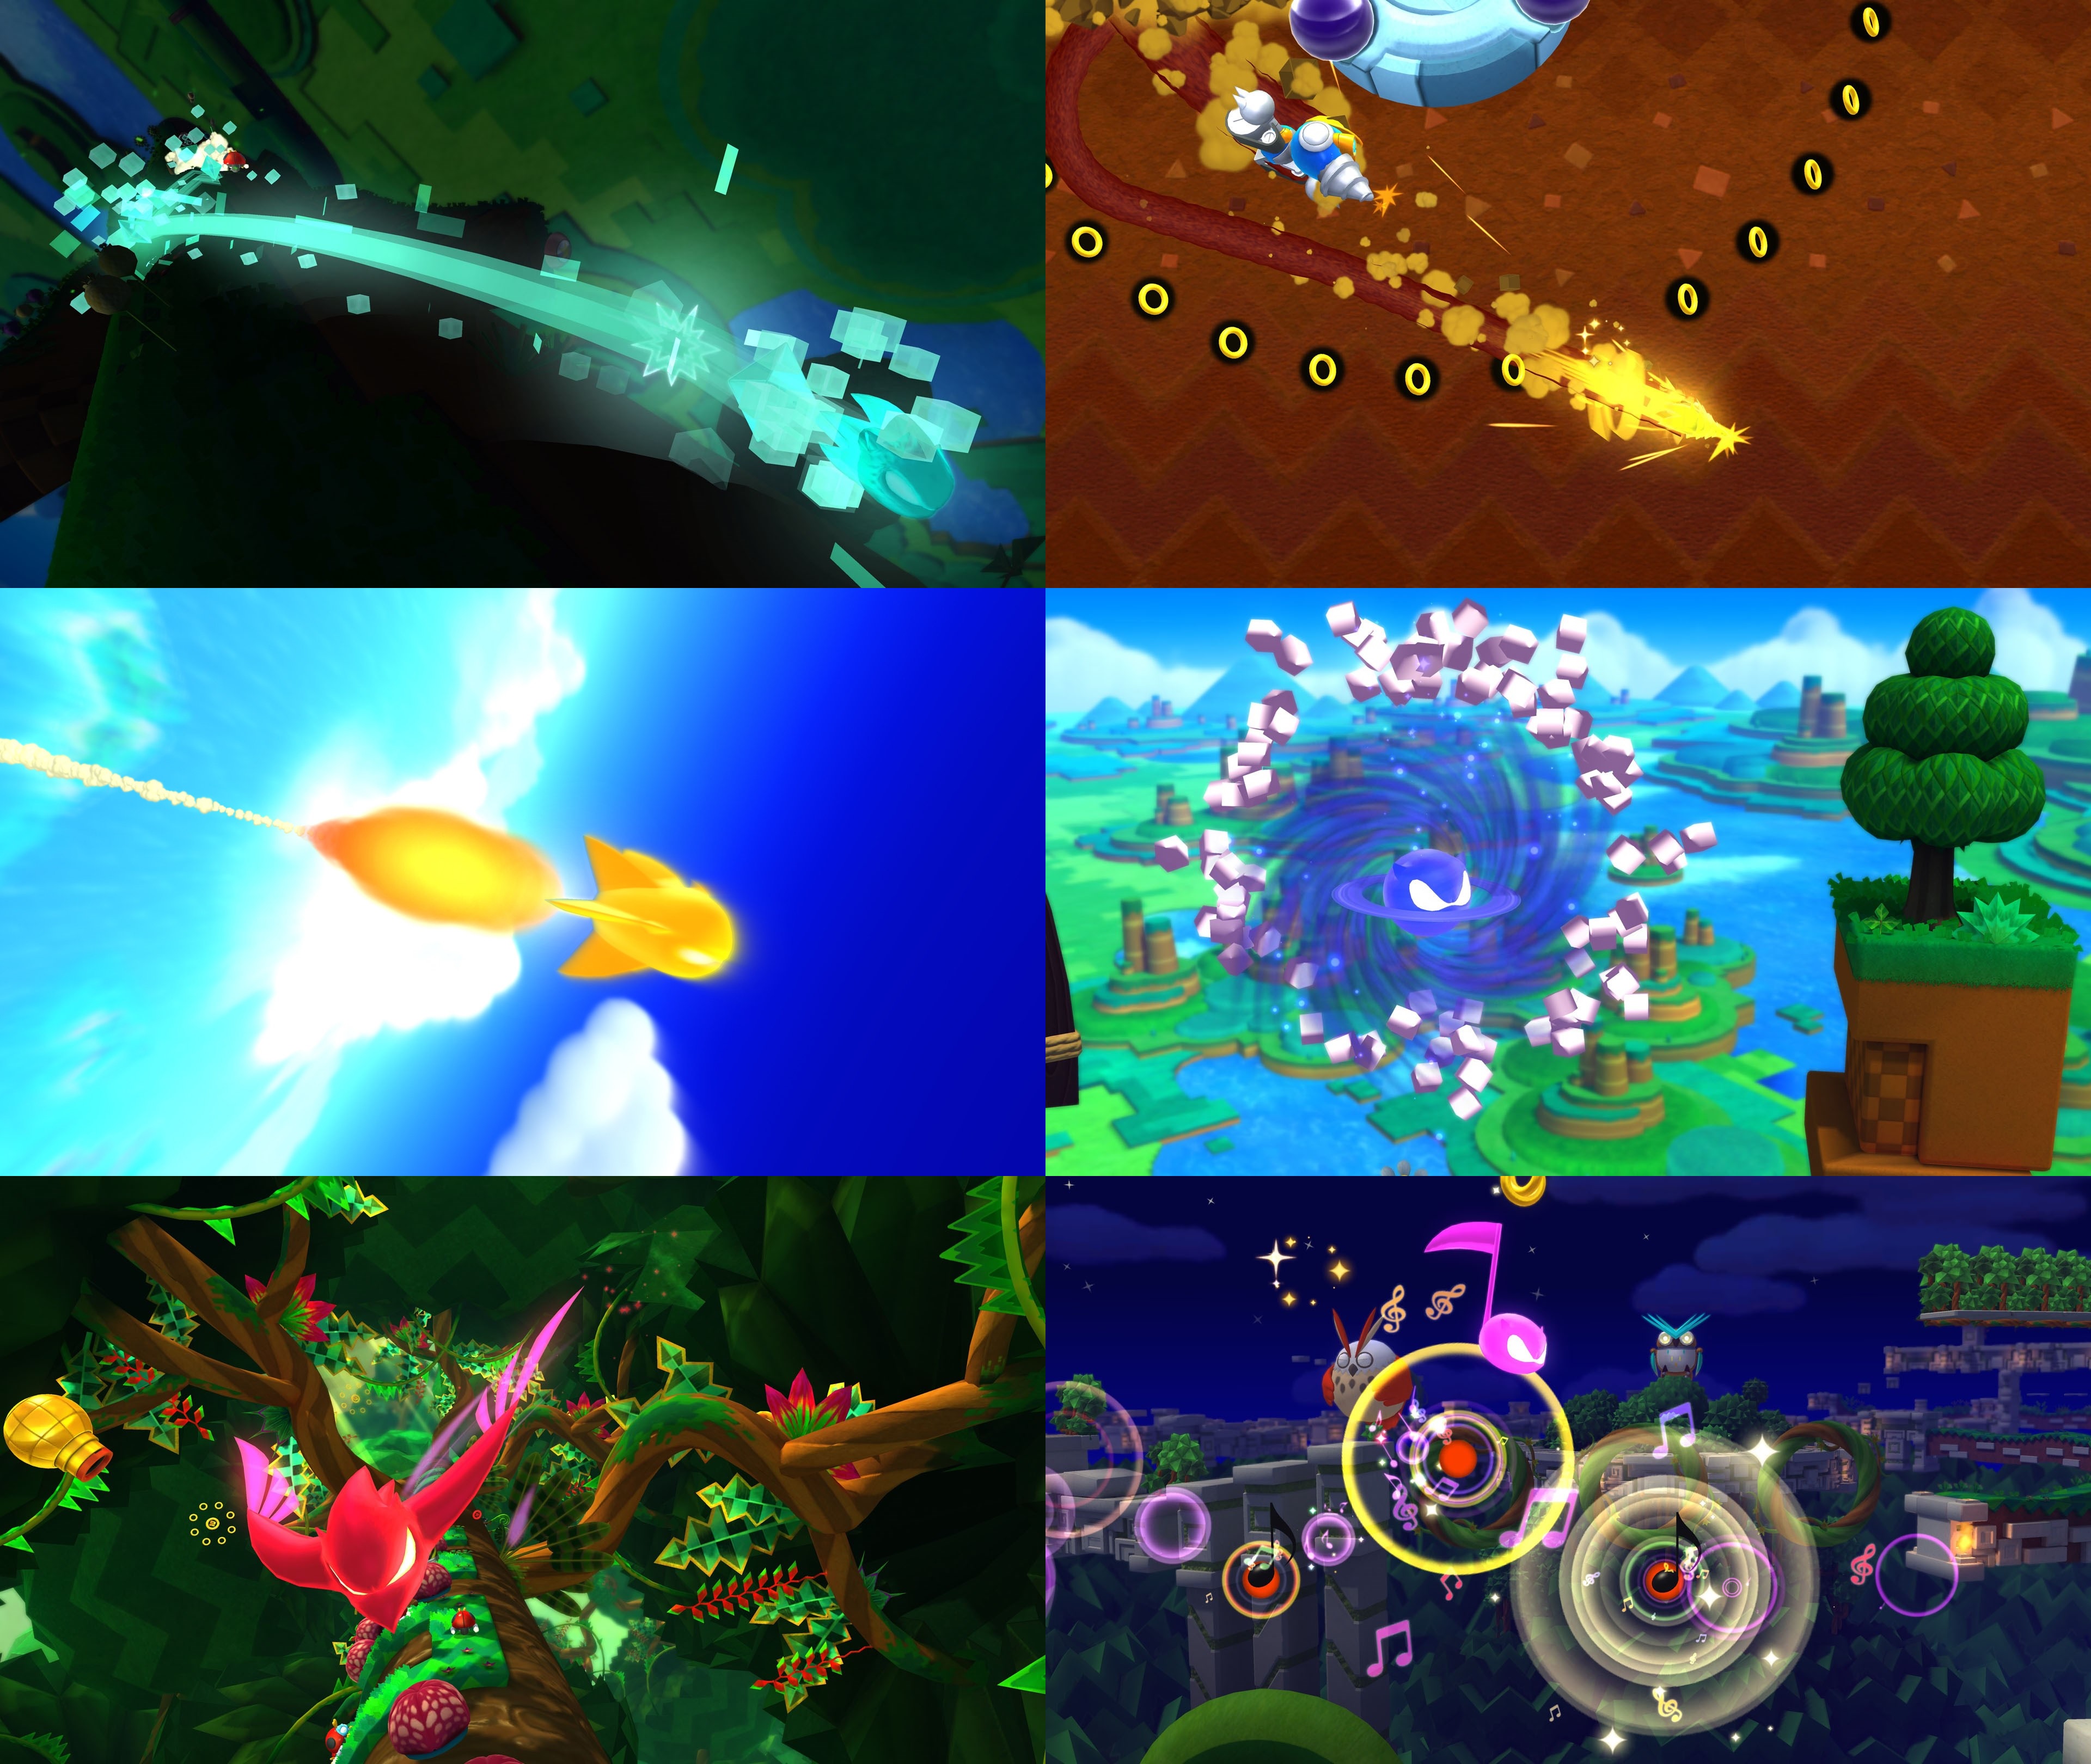 Rush/Colors DS Sonic [Sonic Colors: Ultimate] [Mods]